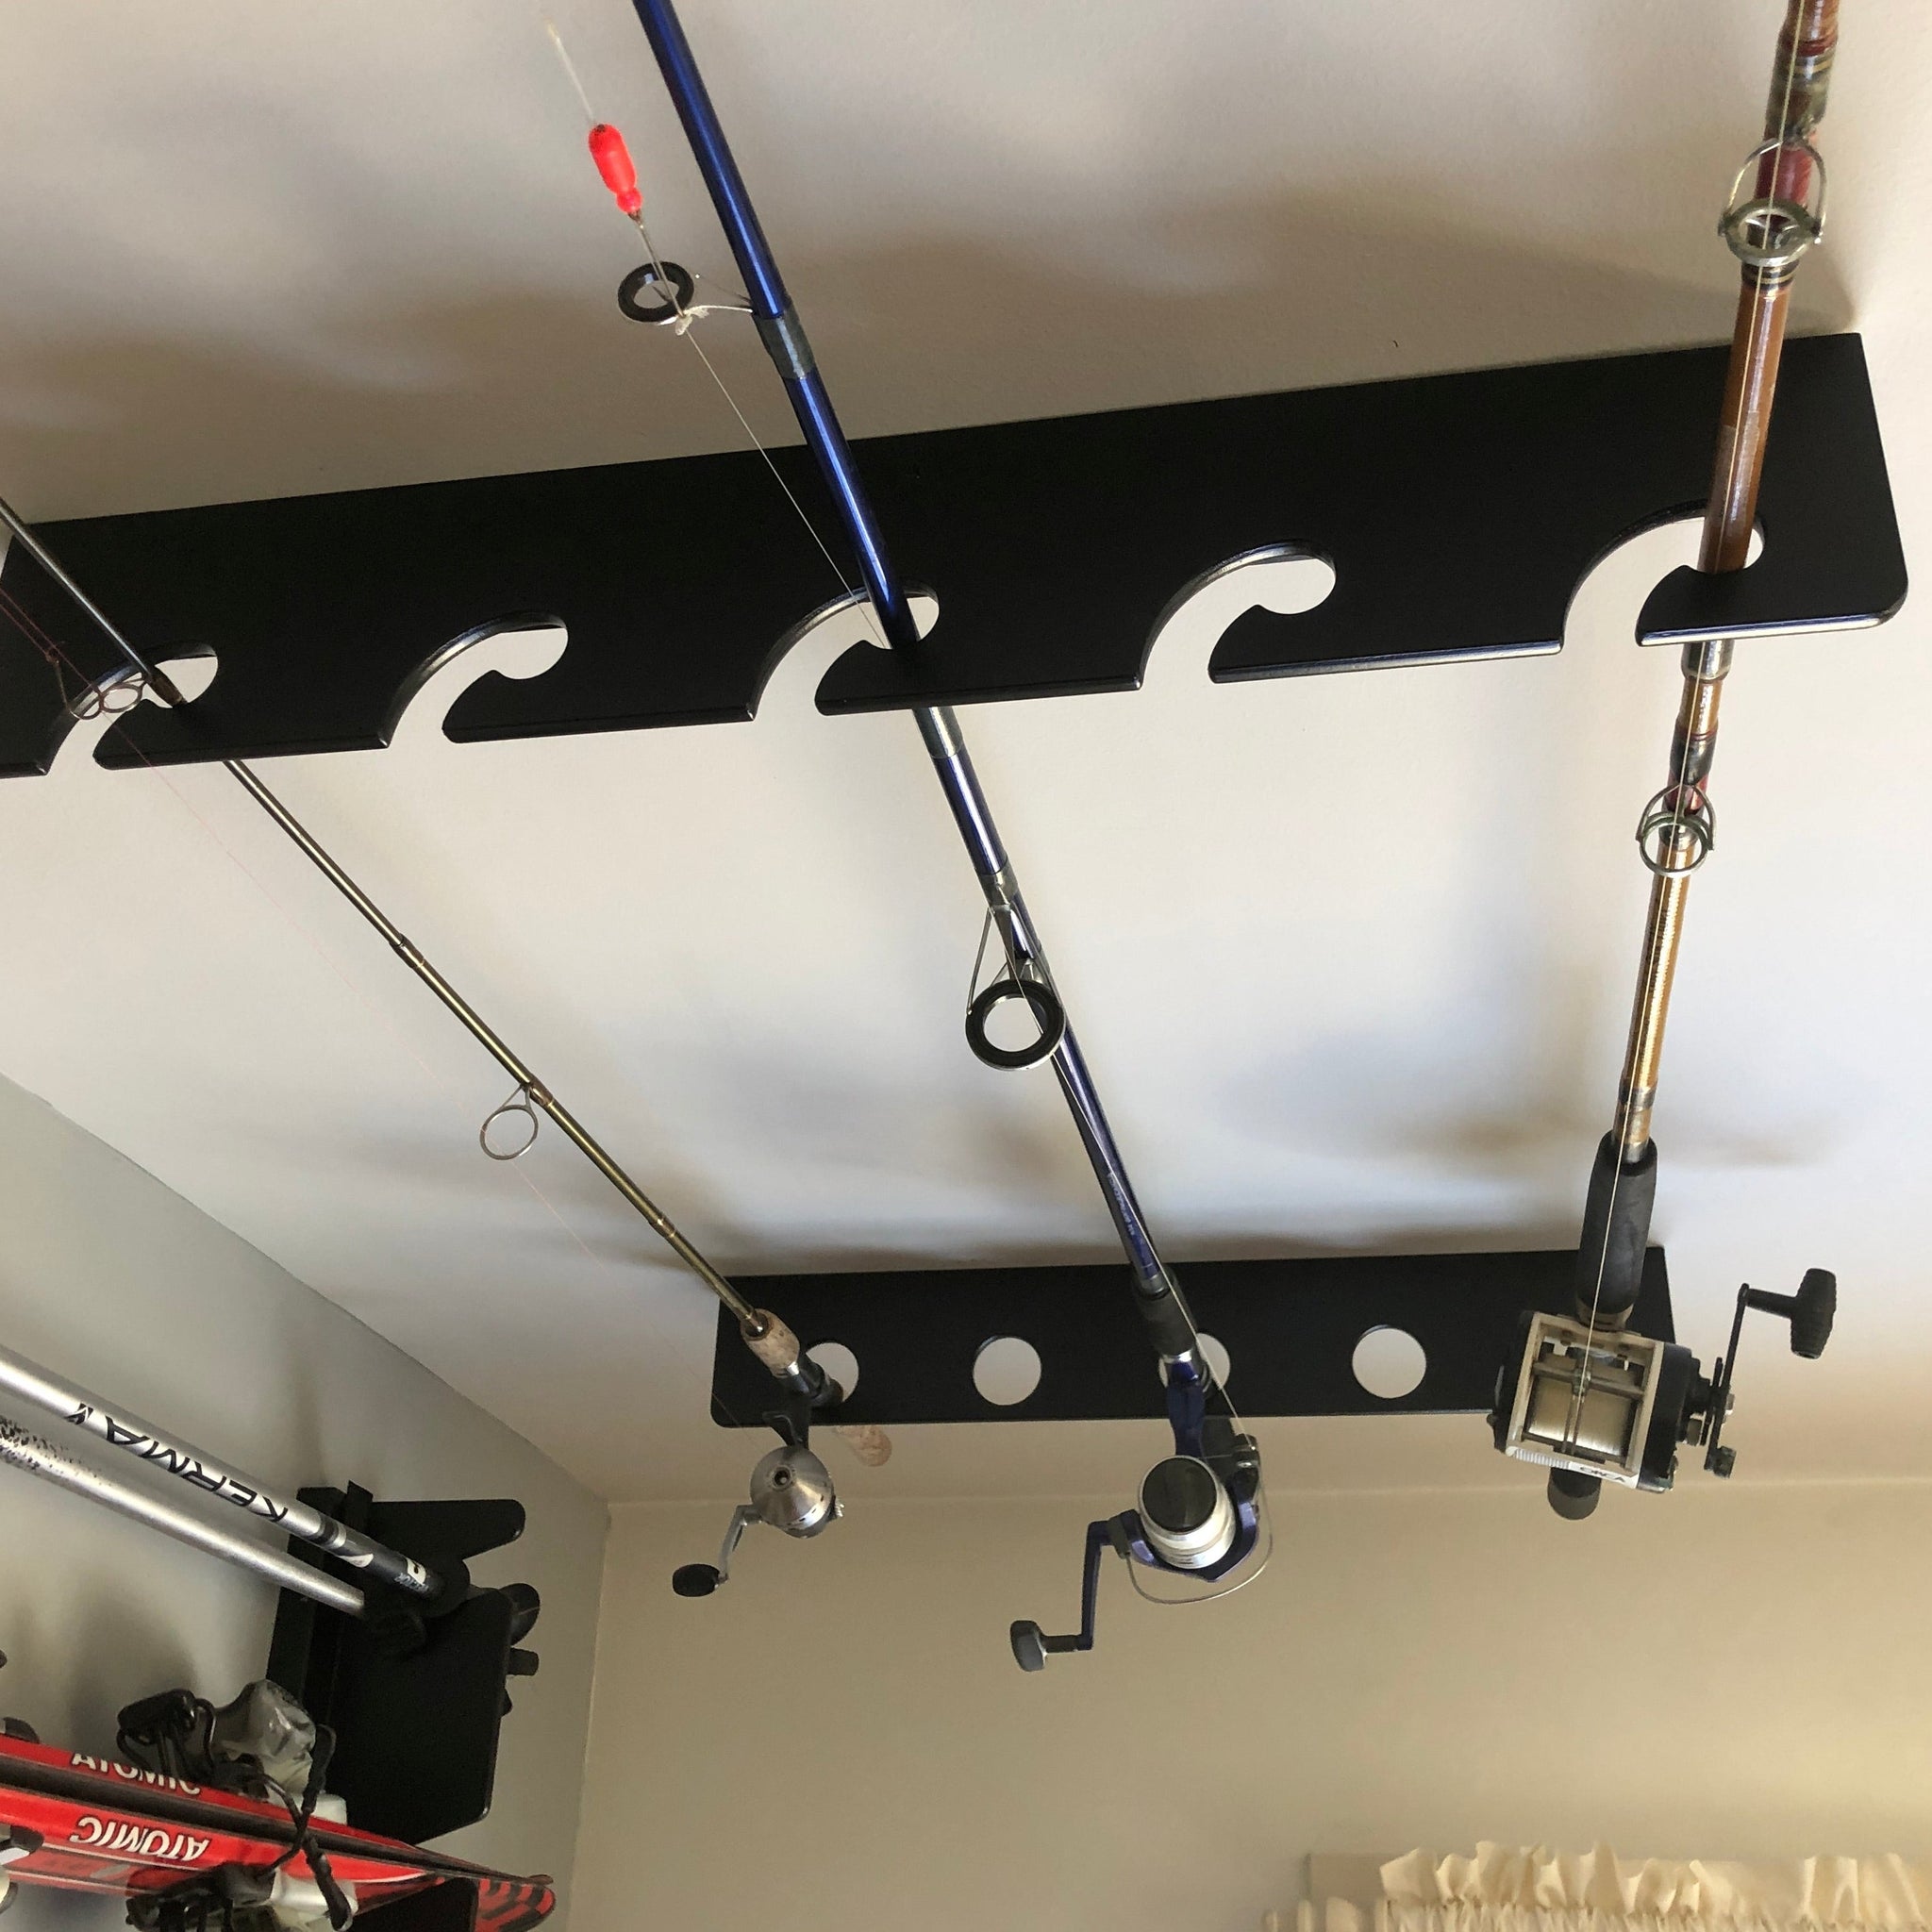 Shop Fishing Rod Holders And Racks At Competitive Prices – Ed's